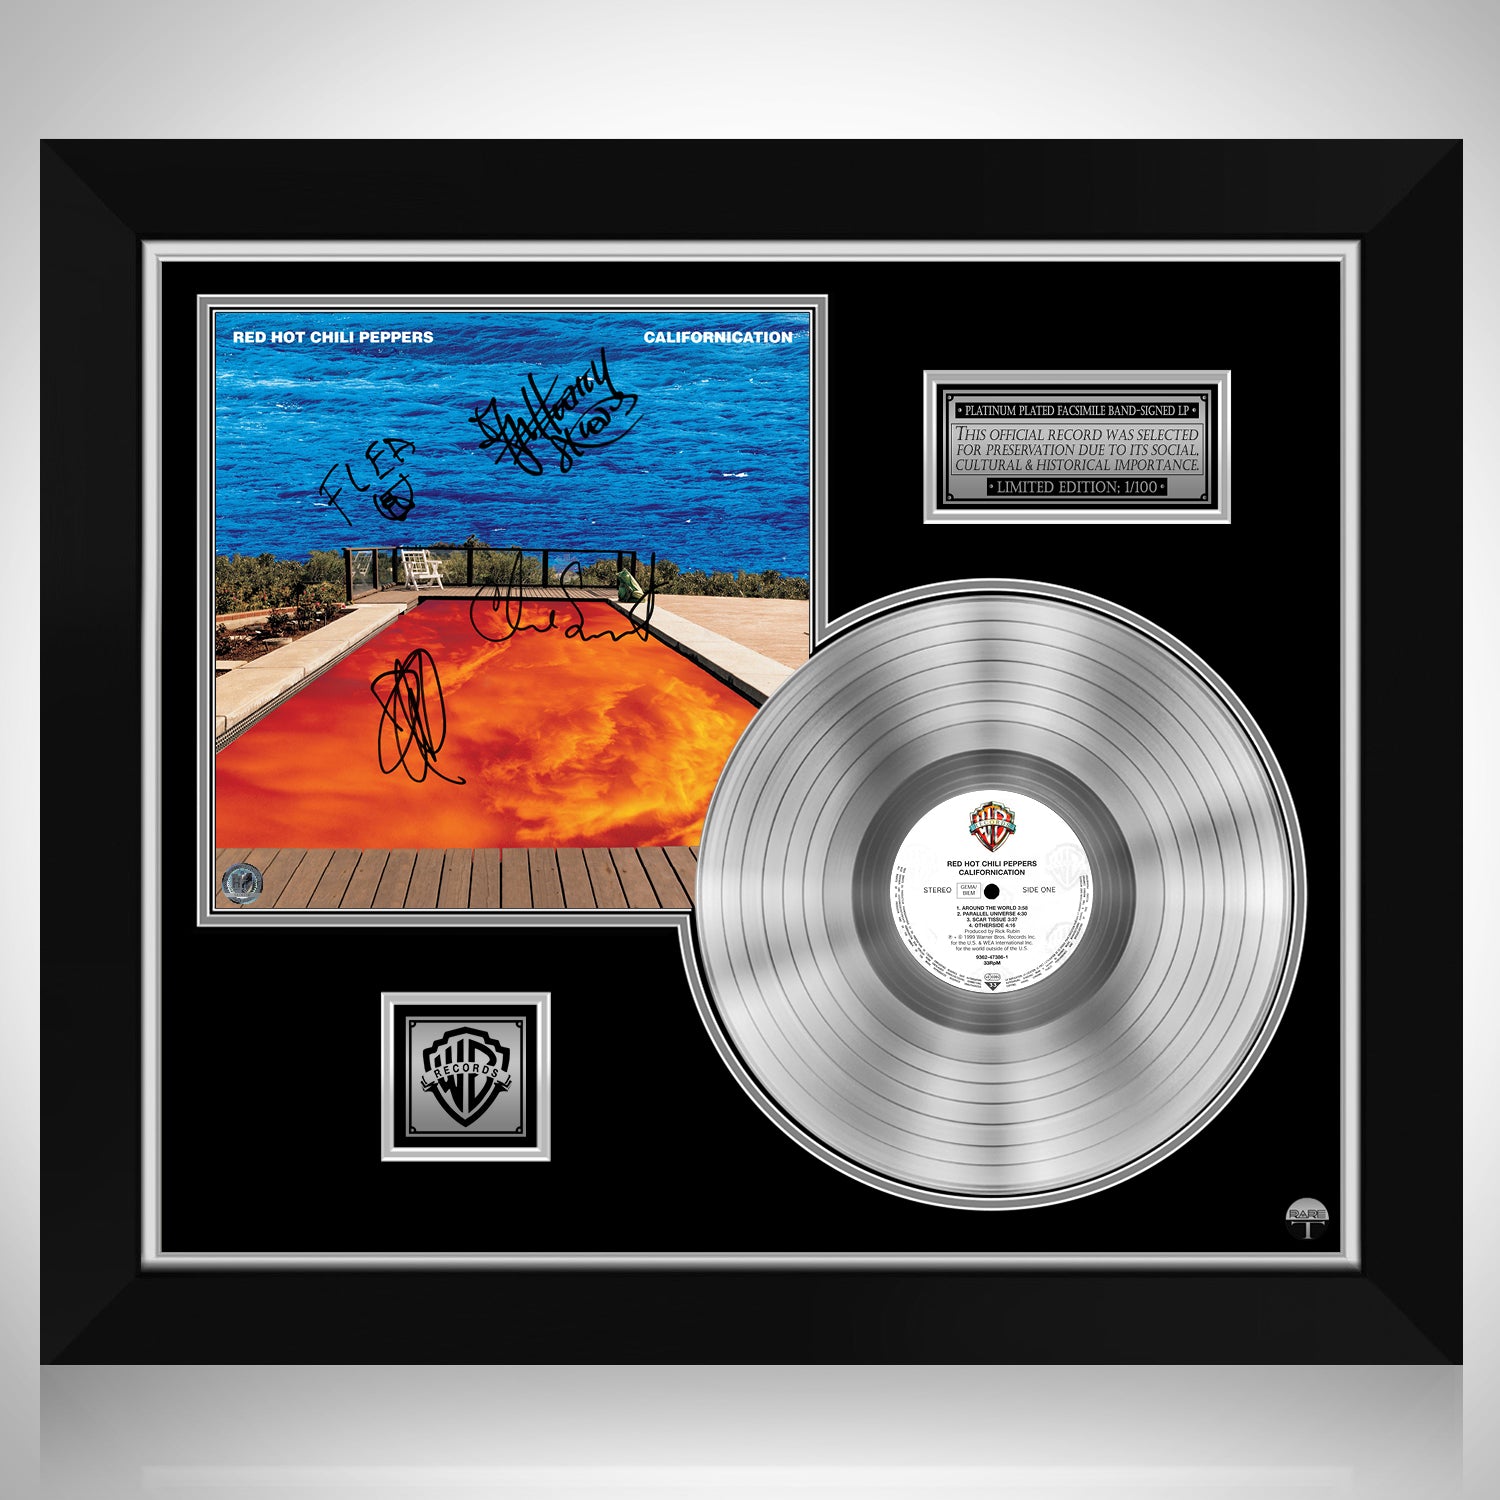 Red Hot Chili Peppers - Californication Platinum LP Limited 